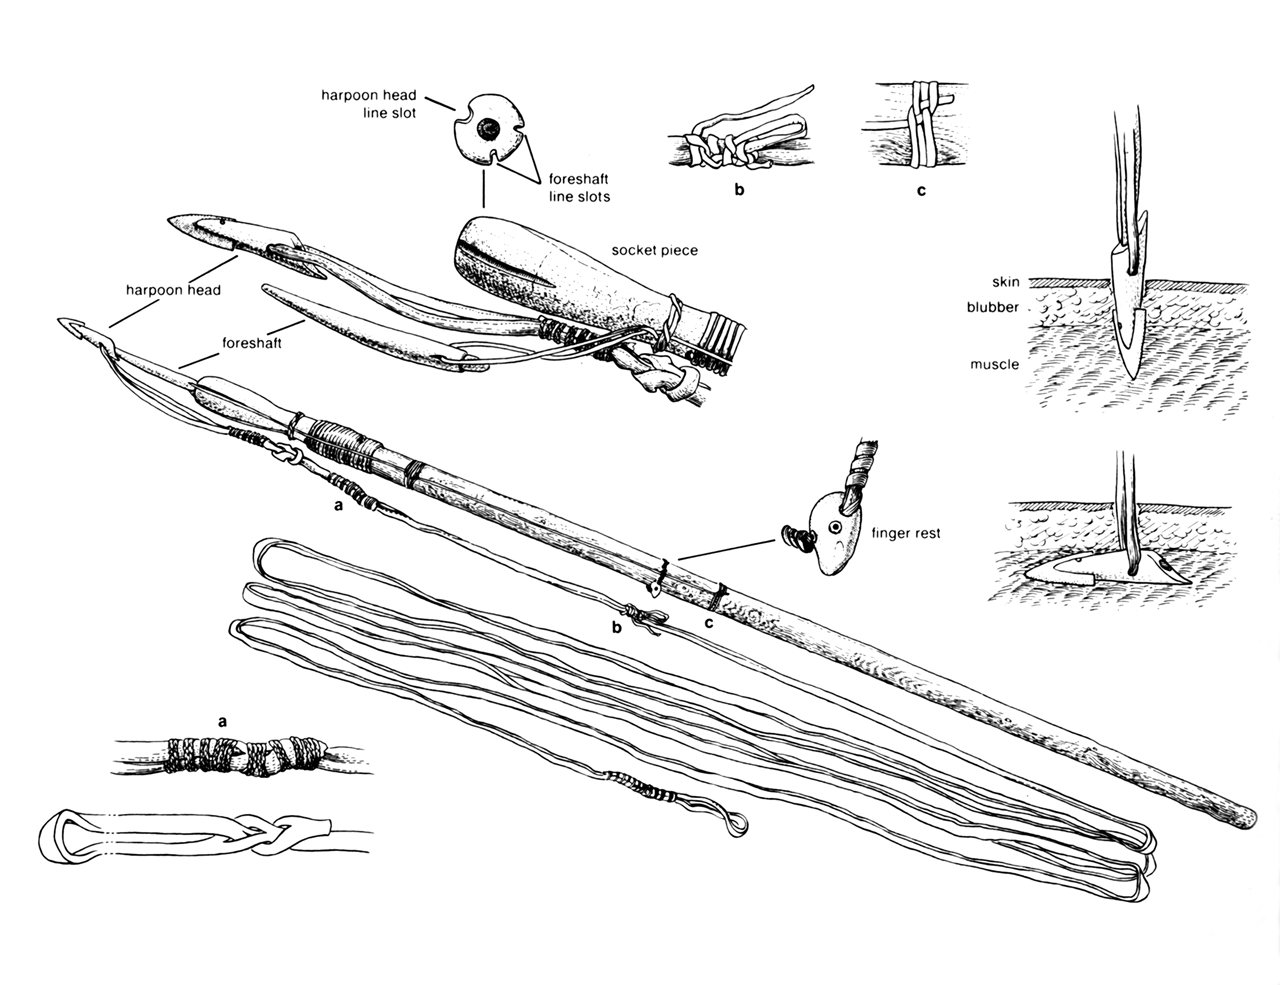 harpoon weapon system